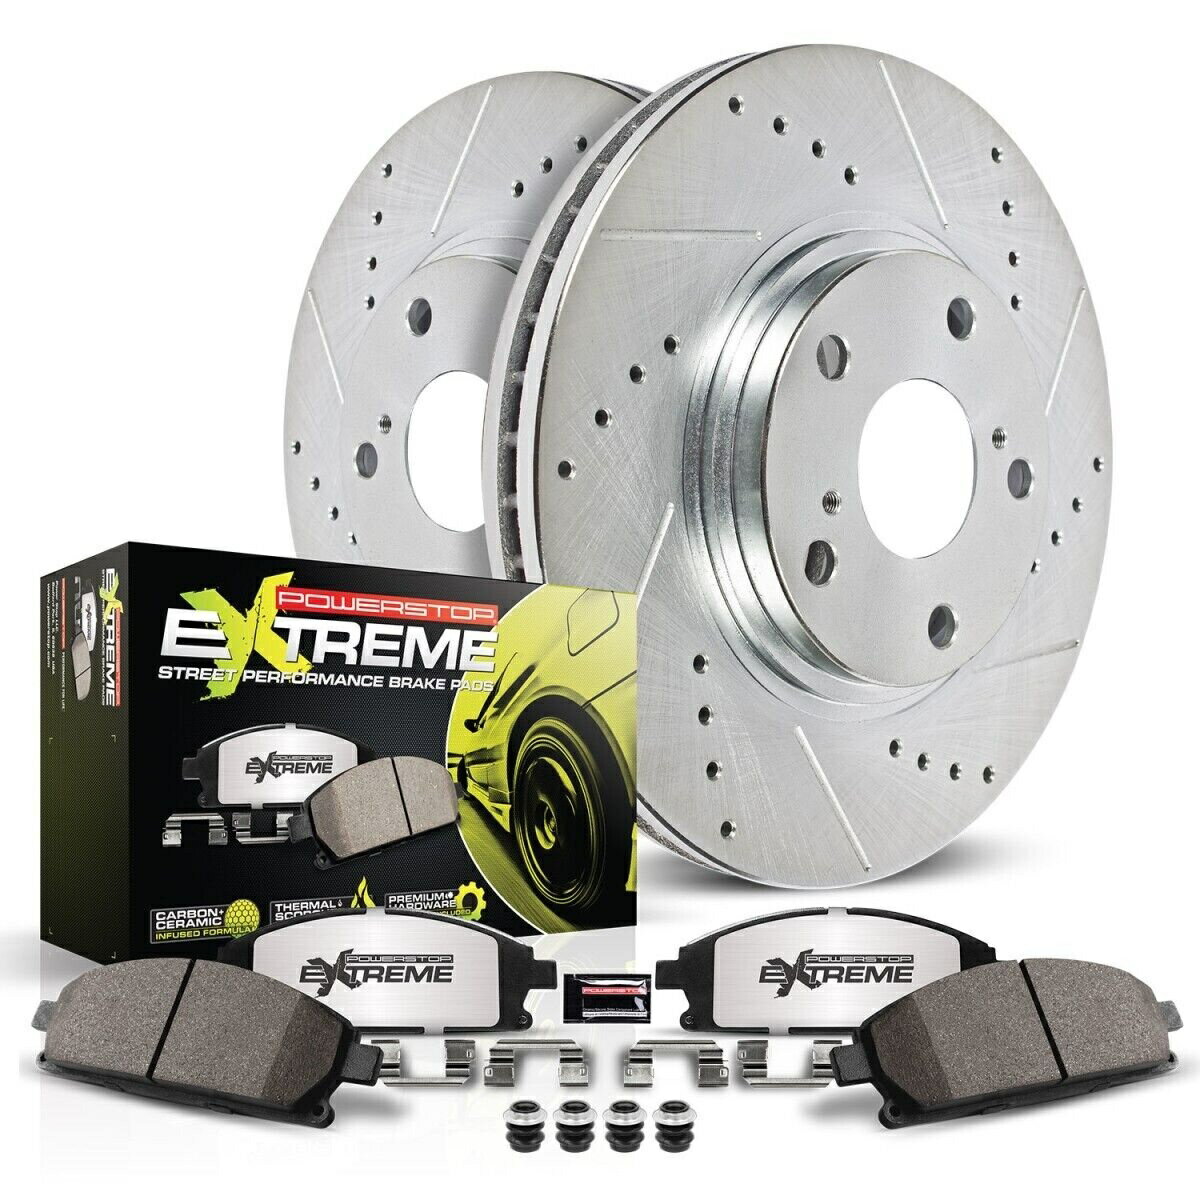 brake disc rotor K5948-26 PowerStop 2ホイールセットブレーキディスクとパッドキットのフロントシボレーカプリス K5948-26 Powerstop 2-Wheel Set Brake Disc and Pad Kits Front for Chevy Caprice